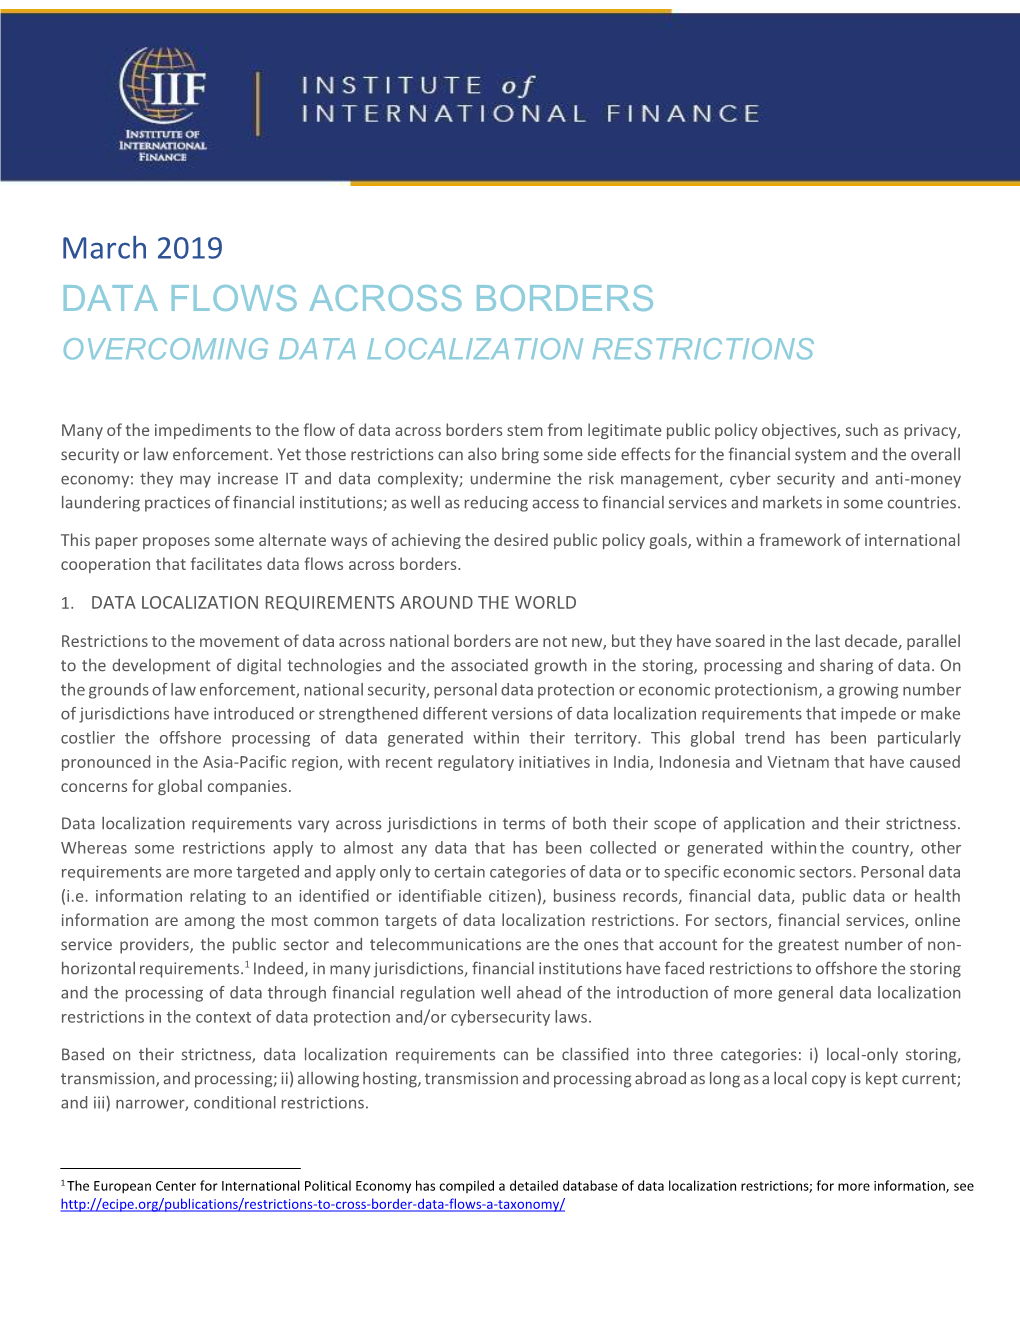 March 2019 DATA FLOWS ACROSS BORDERS OVERCOMING DATA LOCALIZATION RESTRICTIONS